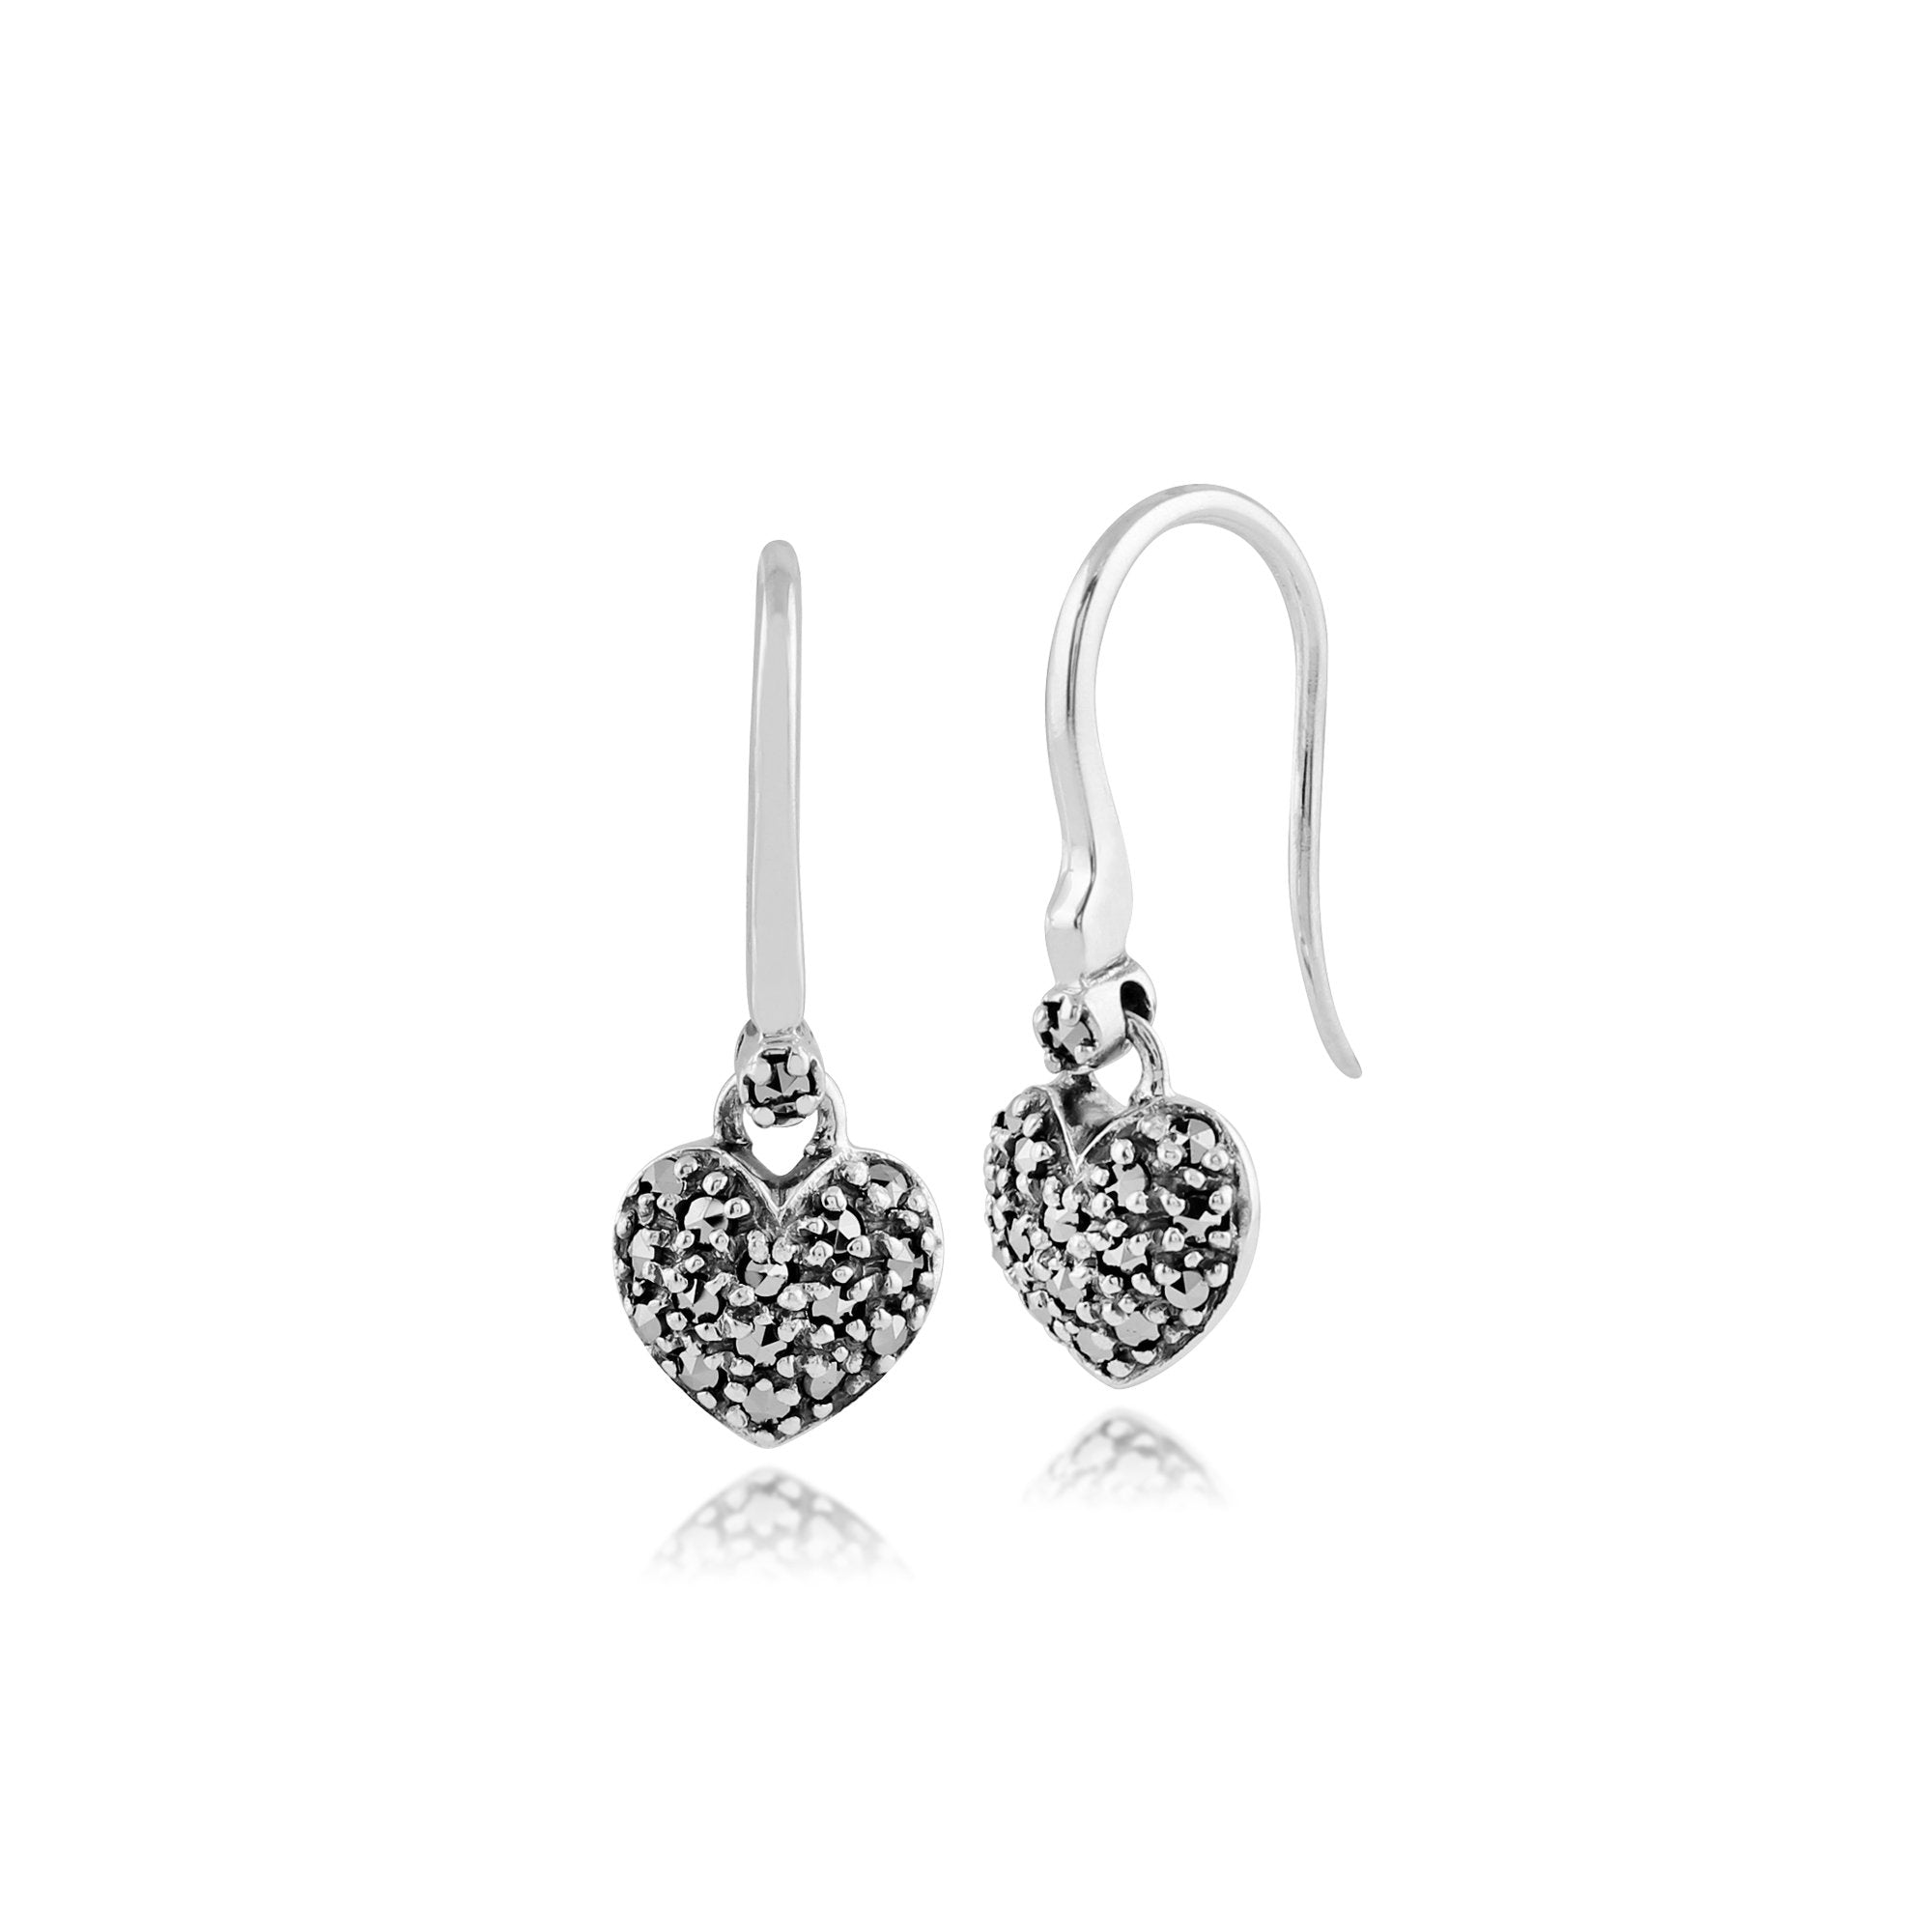 Classic Round Marcasite Heart Drop Earrings in 925 Sterling Silver